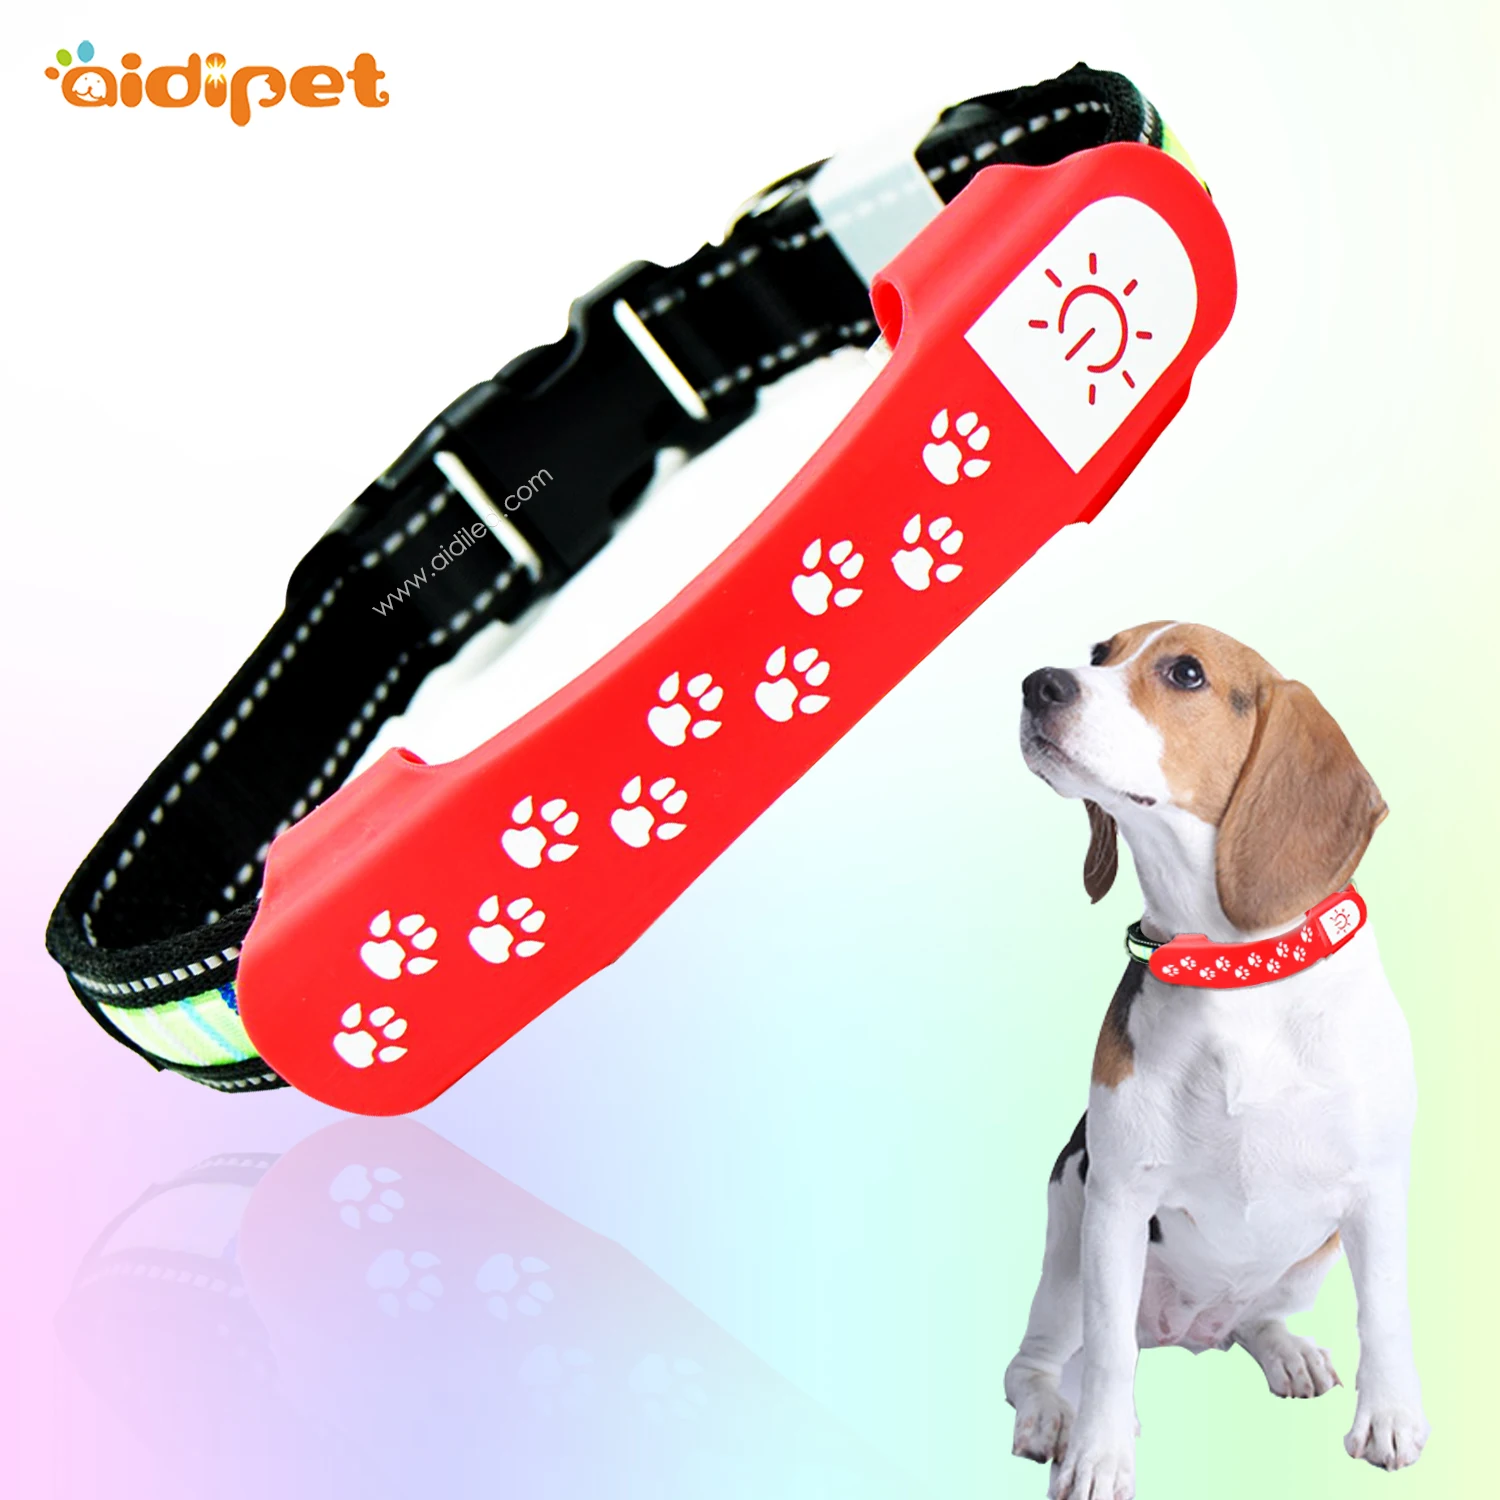 Original Led Dog Collar Cover Attach to Common Dog Collar to Get Visibility Flashing Waterproof Silicone Dog Collar Light